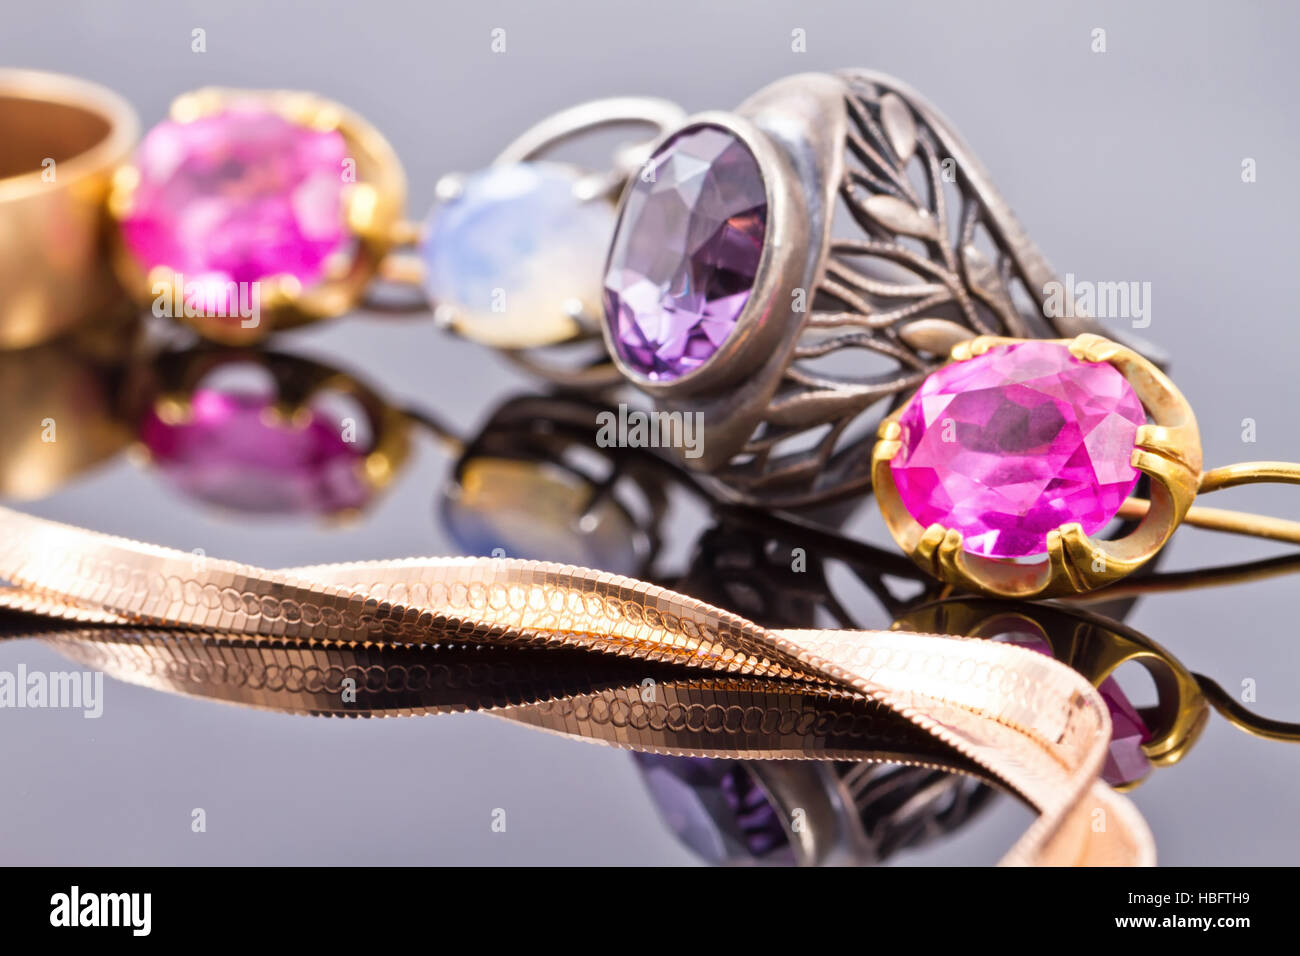 variety of jewelry made of precious metals Stock Photo